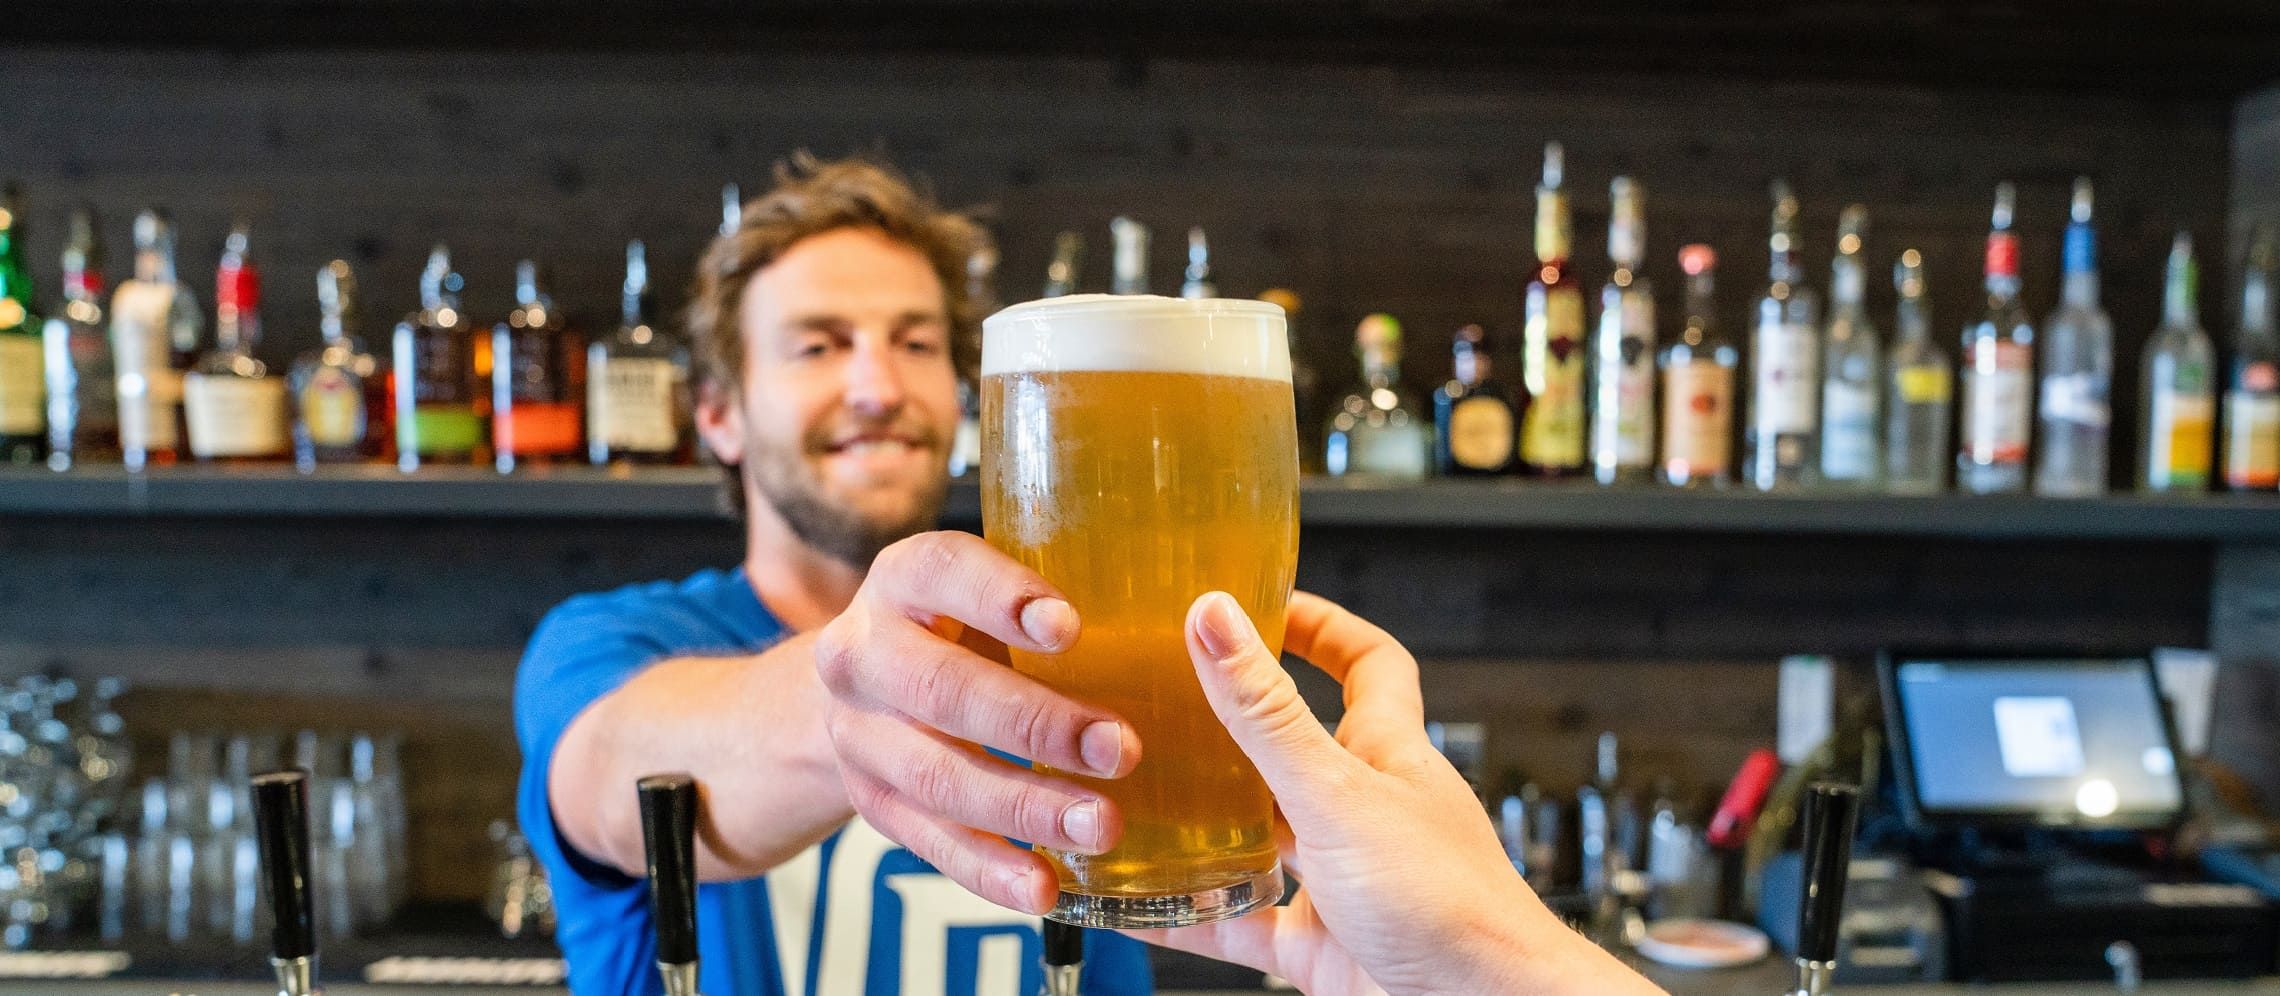 Photo for: 7 Easy Steps To Boost Craft Beer Sales At Your On-Premise Establishment